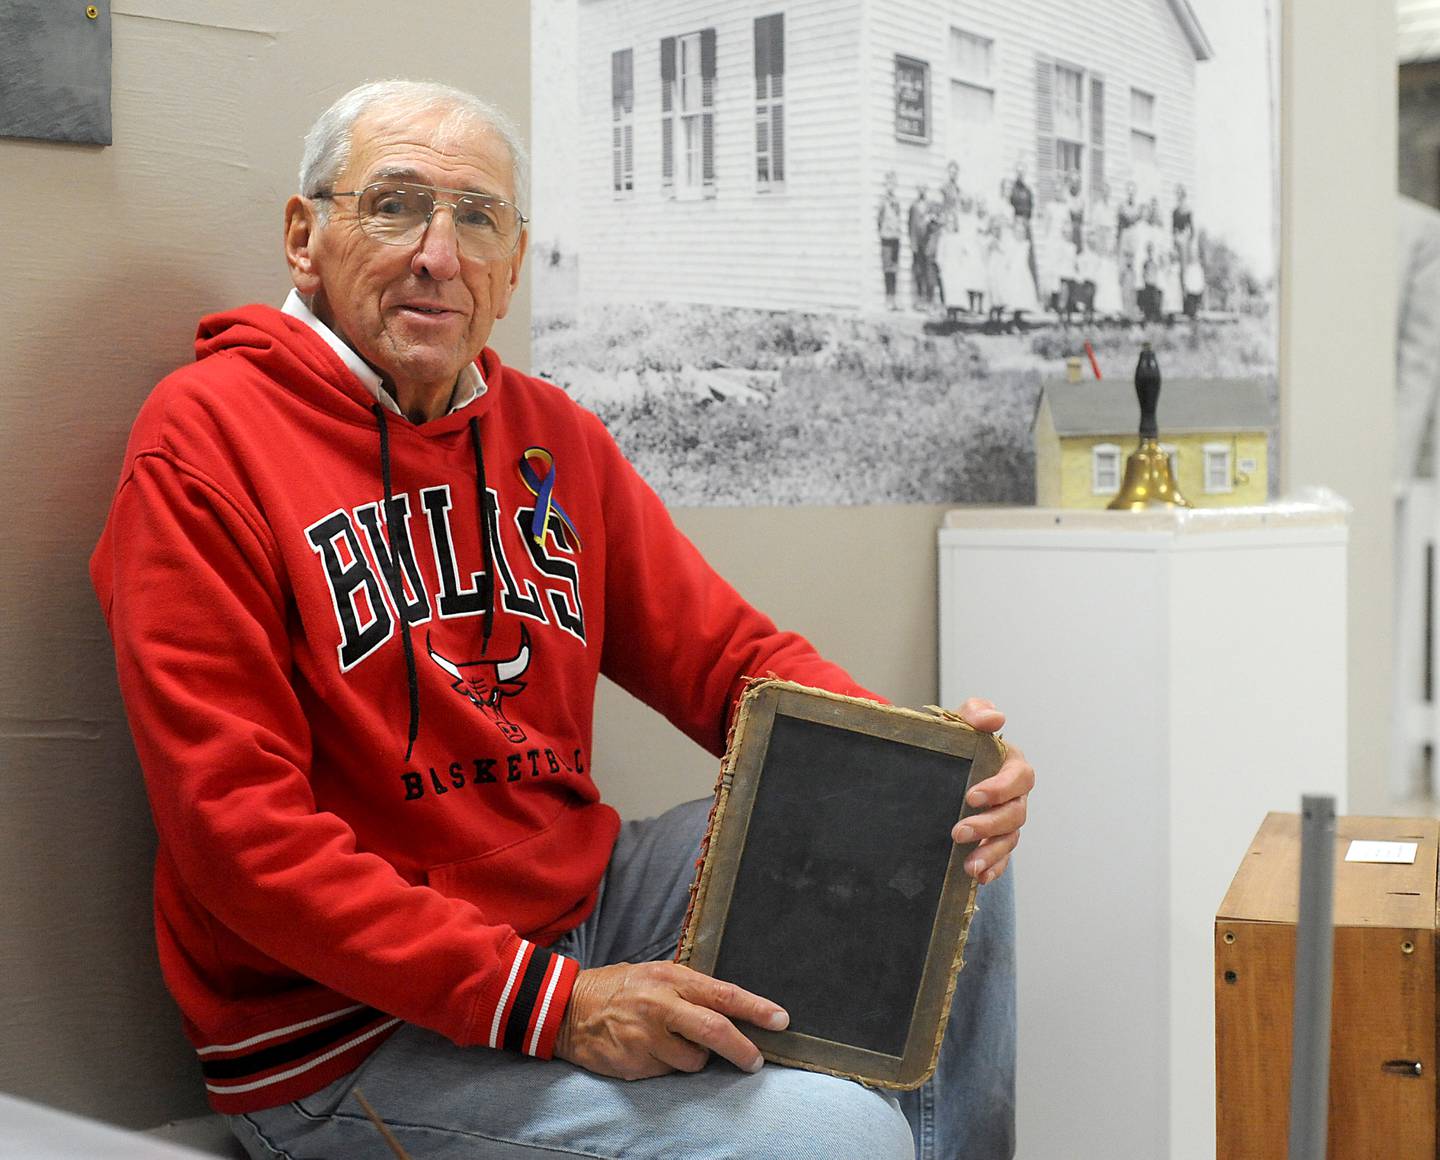 Bob Frenz, who is a retired educator from Huntley, is photographed with the McHenry County Historical Society and Museum’s exhibit about one-room schools. He has written about the history of schools in McHenry County and specializes in how one-room schoolhouses consolidated and modernized in the ‘40s and ‘50s.